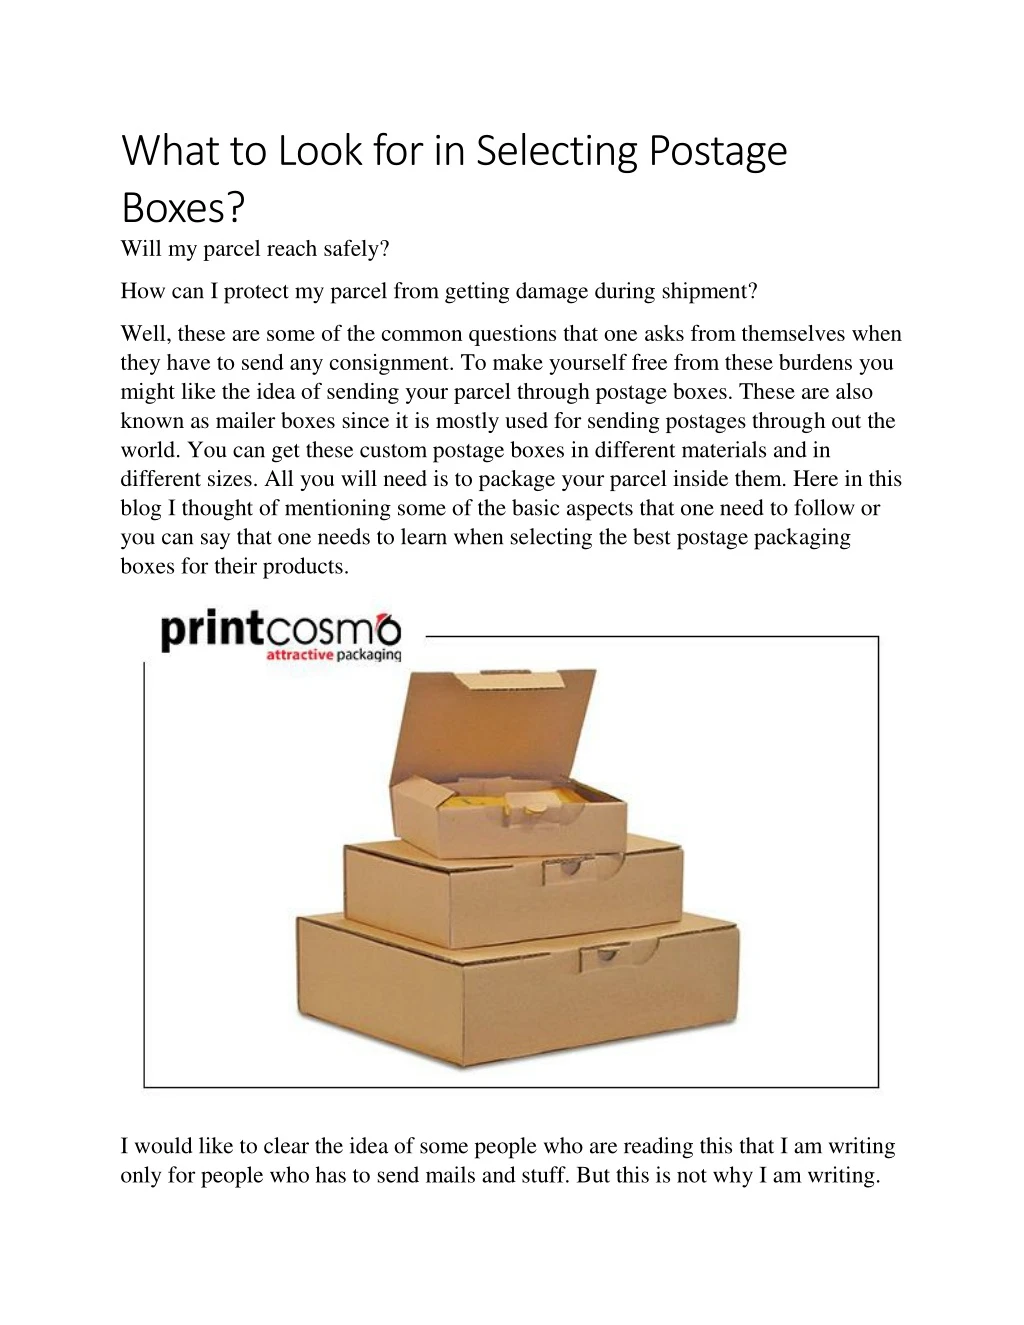 what to look for in selecting postage boxes will